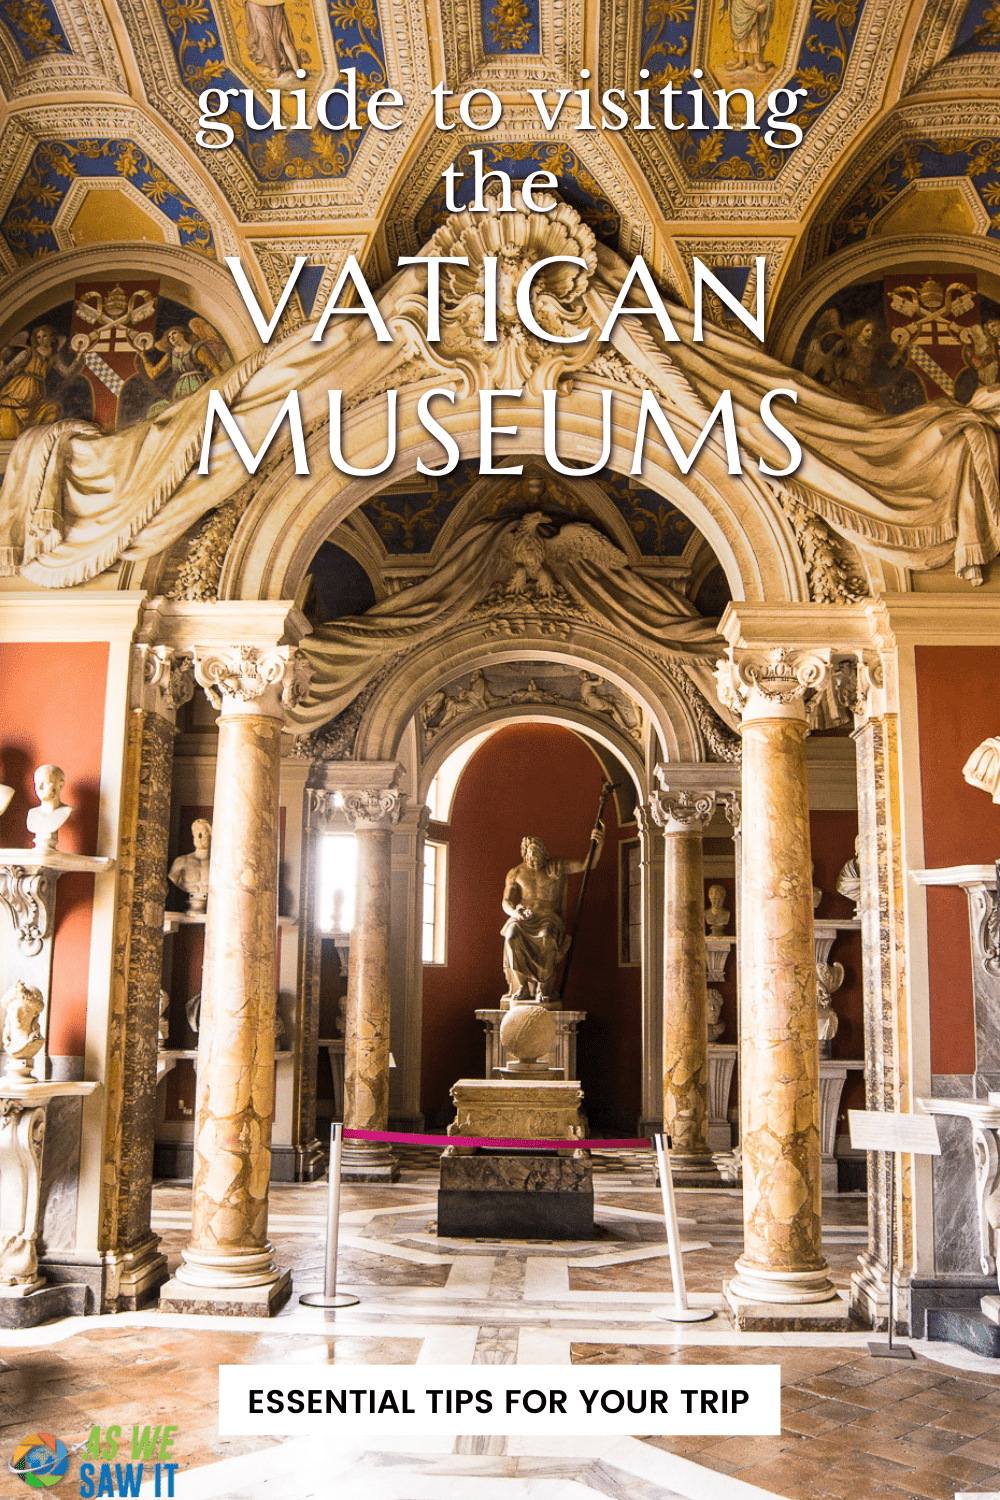 Gallery in the Vatican Museums.  Text overlay says "guide to visiting the Vatican Museums: Essential tips for your trip."
Some common misspellings are vatican meseum, vatican musiem, vatican musuem, vattican museum, vatican miseum, atican museum, batican museum, and varican museum